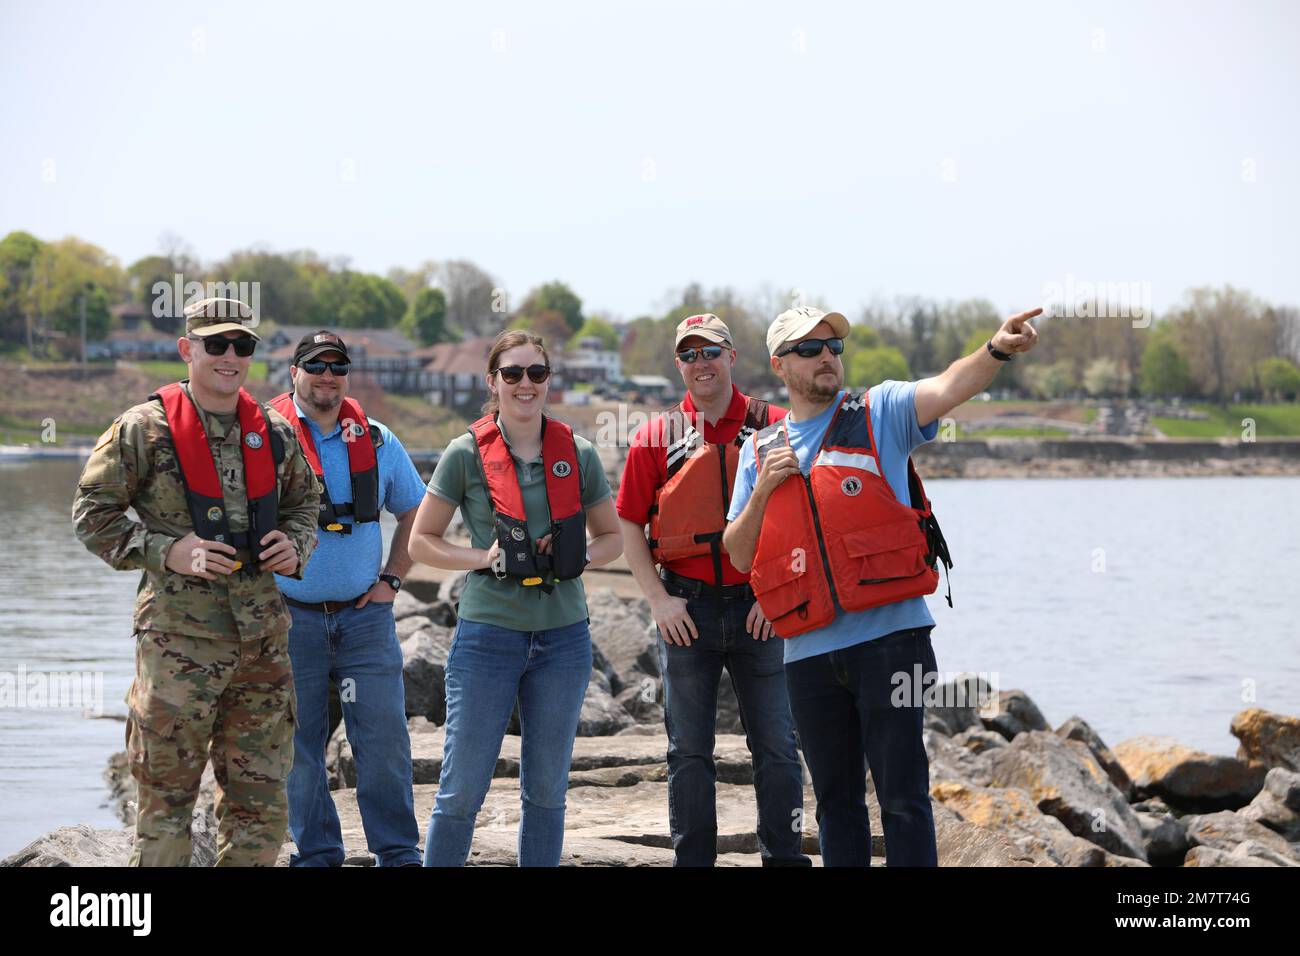 U.S. Army Corps of Engineers, Buffalo District team members stand on the Oswego Harbor breakwater off the coast of Oswego, New York, May 12, 2022. The breakwater, which is maintained by the Buffalo District, ensures safe navigation for commercial and recreational vessels travelling on the Great Lakes and the Oswego River. Stock Photo